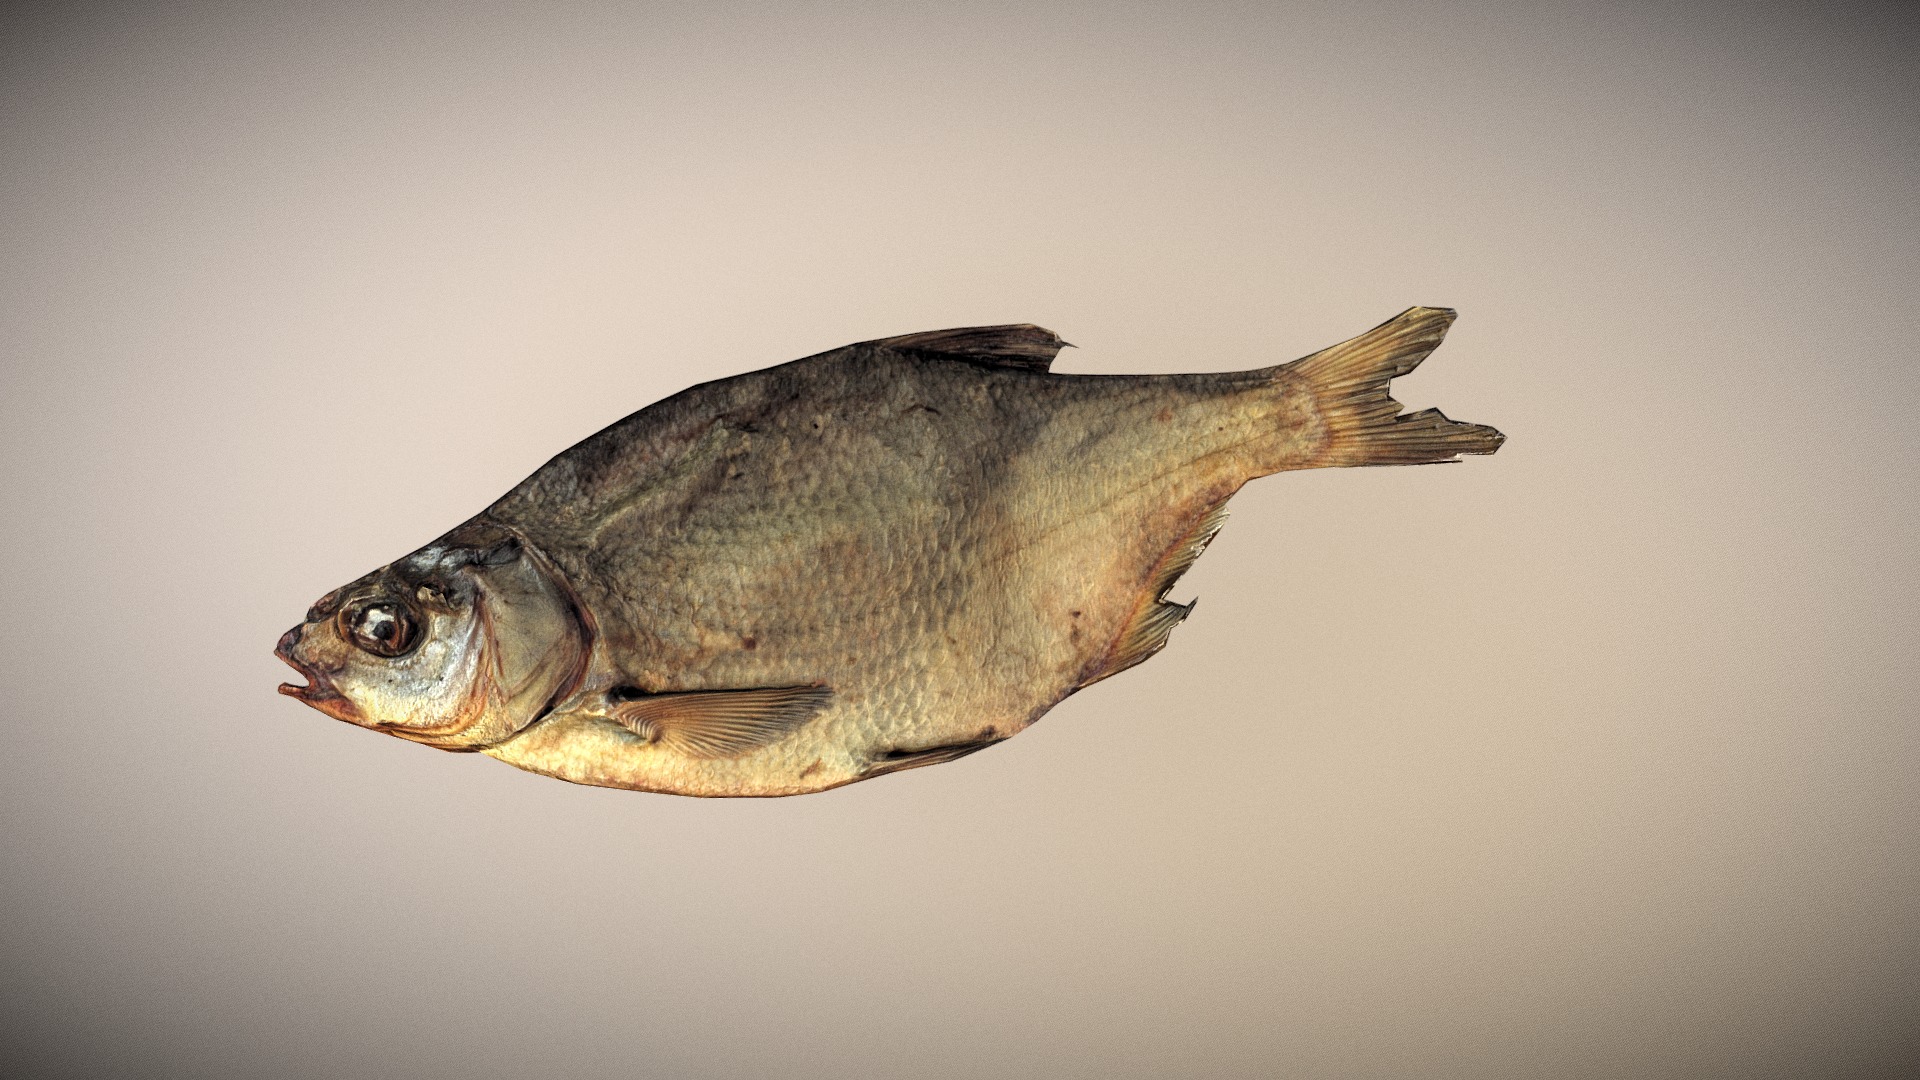 3D model photo realistic low poly scanned big dried Fish - This is a 3D model of the photo realistic low poly scanned big dried Fish. The 3D model is about a fish with a long tail.